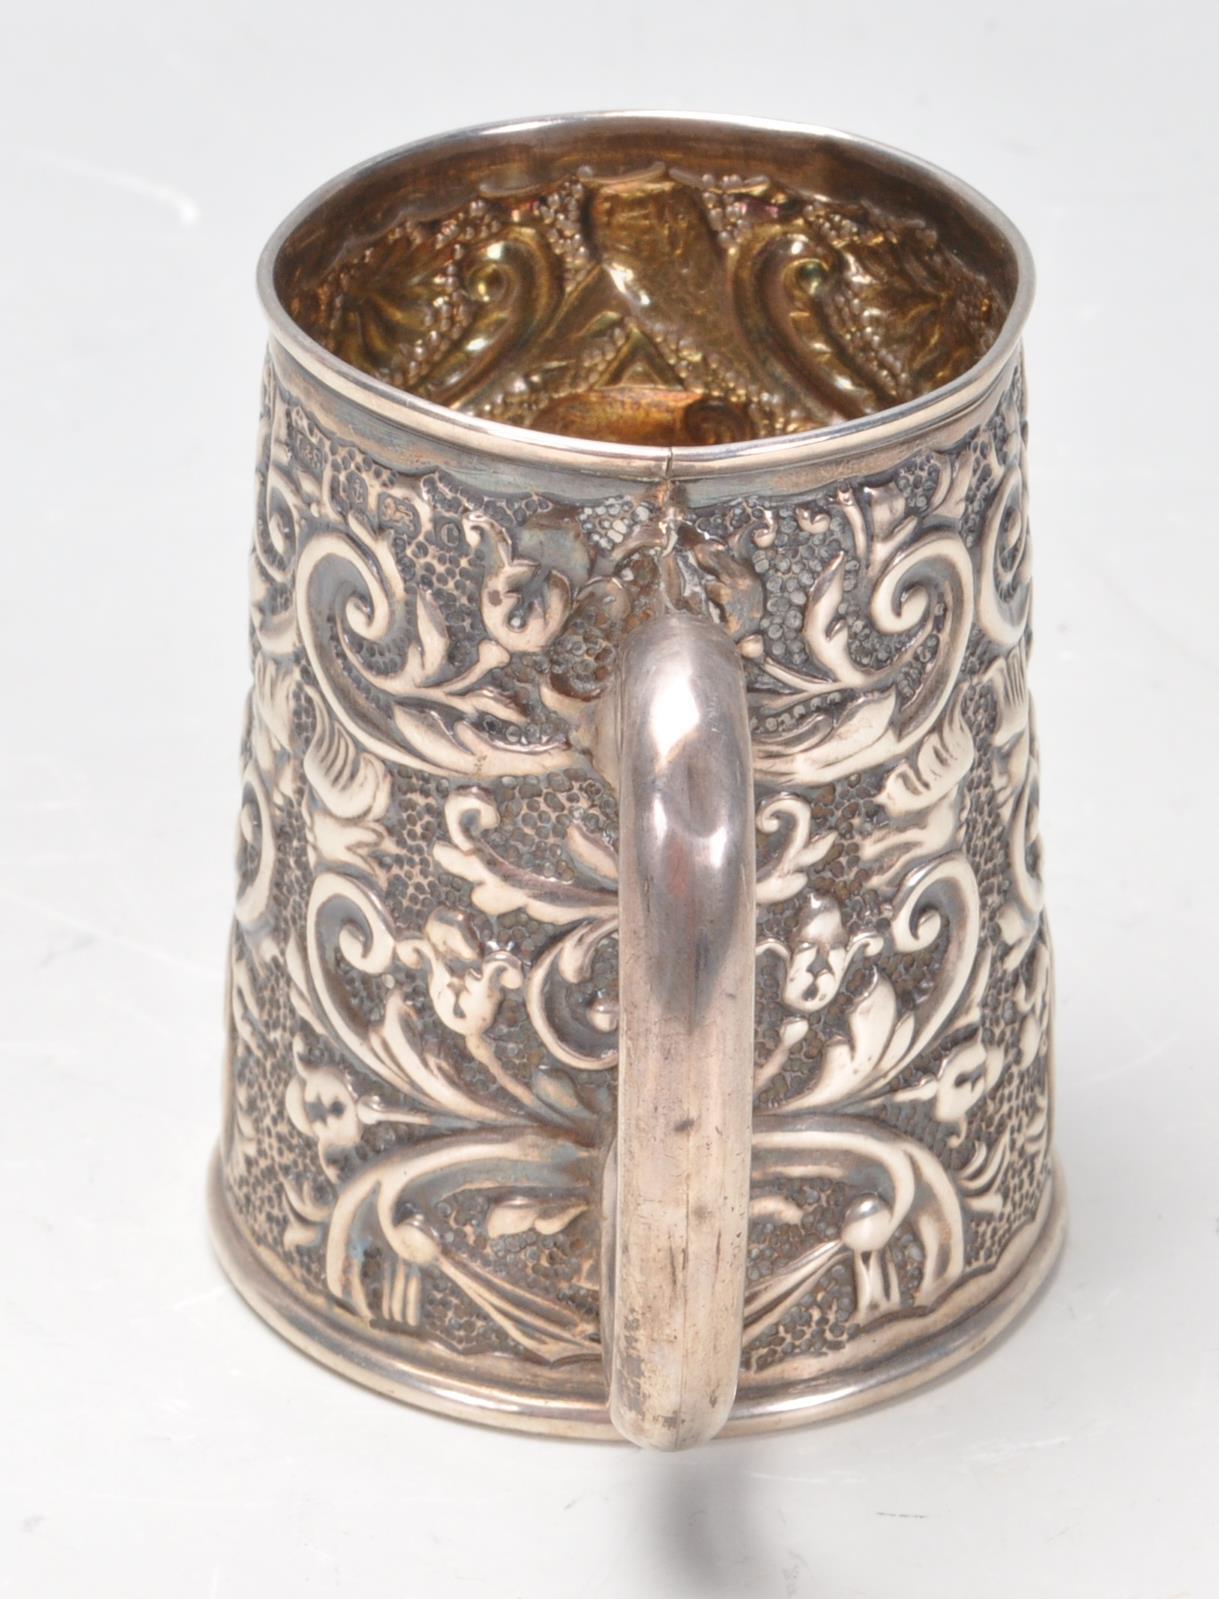 EDWARDIAN SILVER CHRISTENING CUP - Image 2 of 7